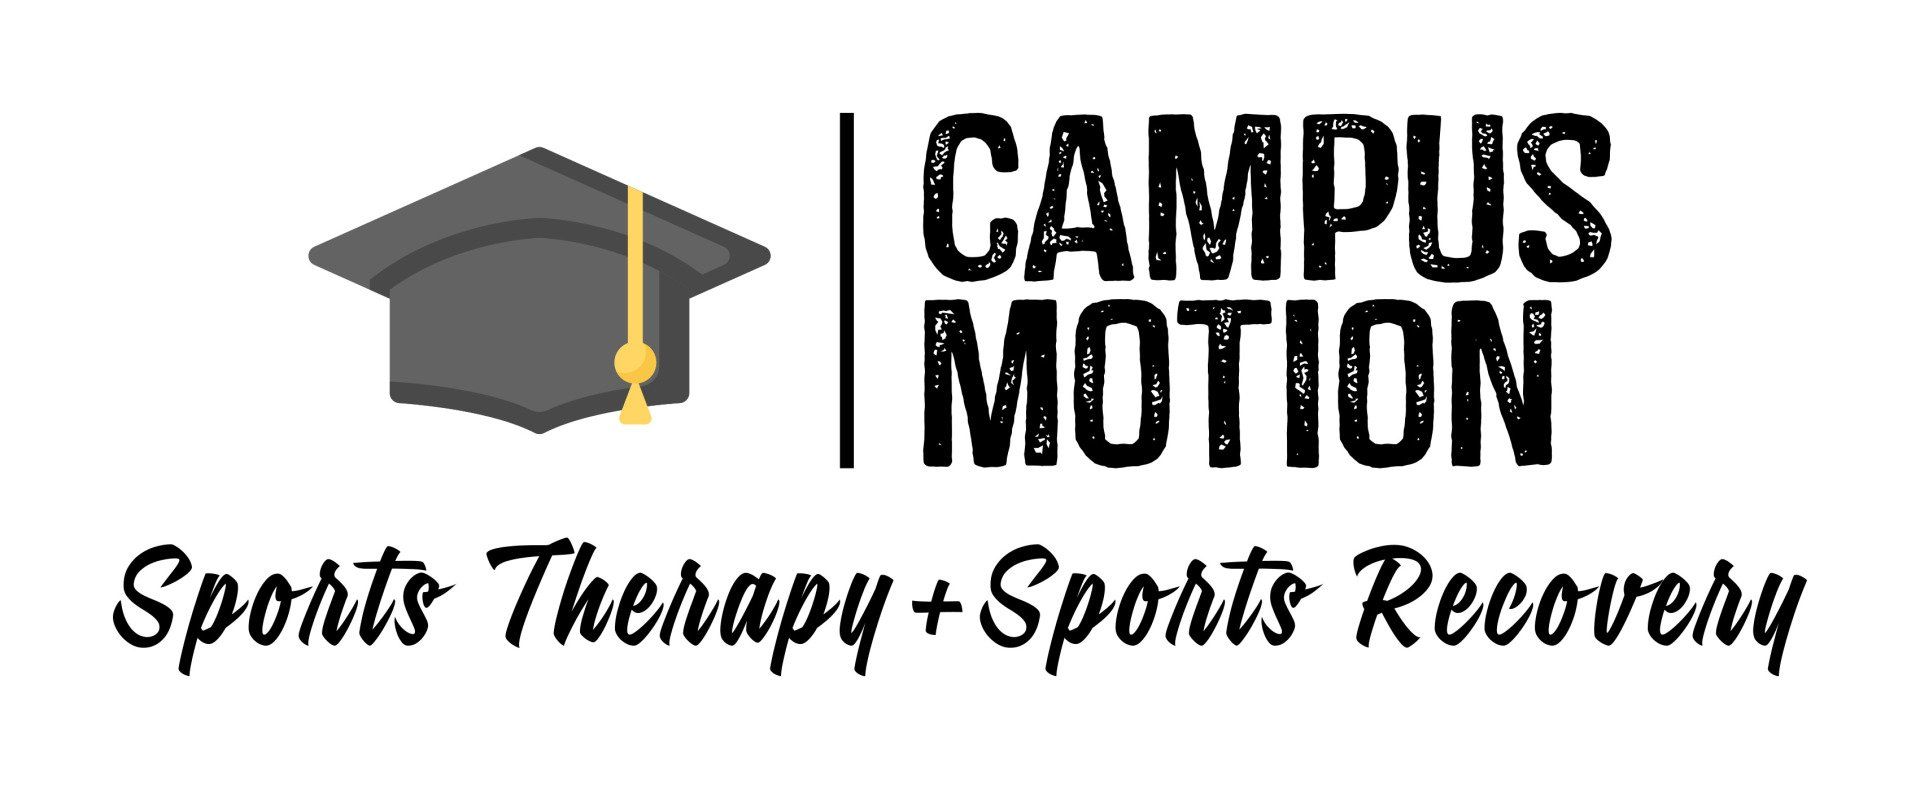 Black logo, Sports Therapy, Sports Recovery, campus motion logo logo